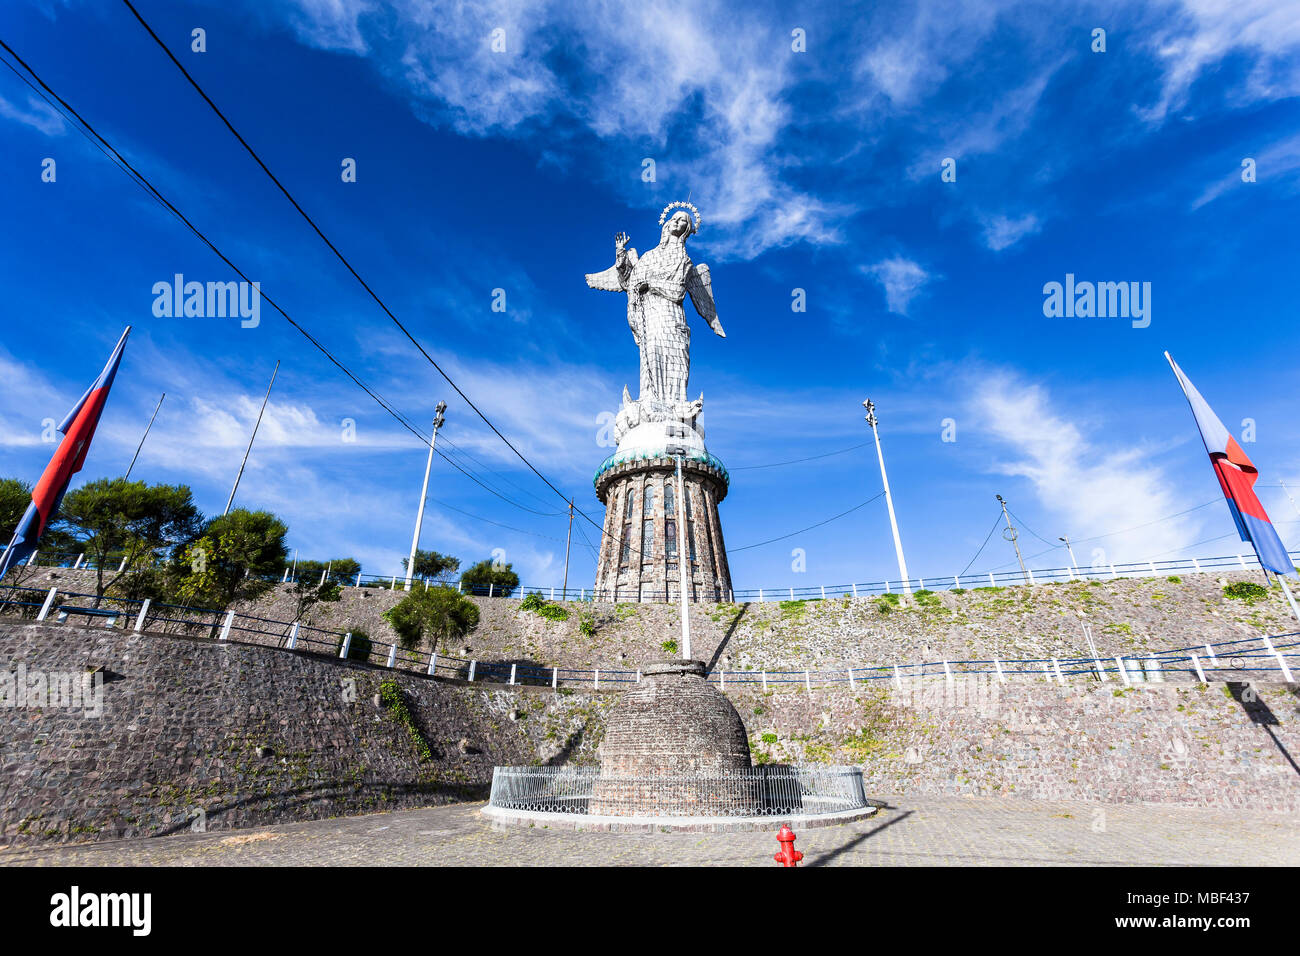 QUITO, ECUADOR - JUNE 14, 2015: The monument of the Virgen del Panecillo looks magnificent in the morning on top of the small hill in the center of th Stock Photo